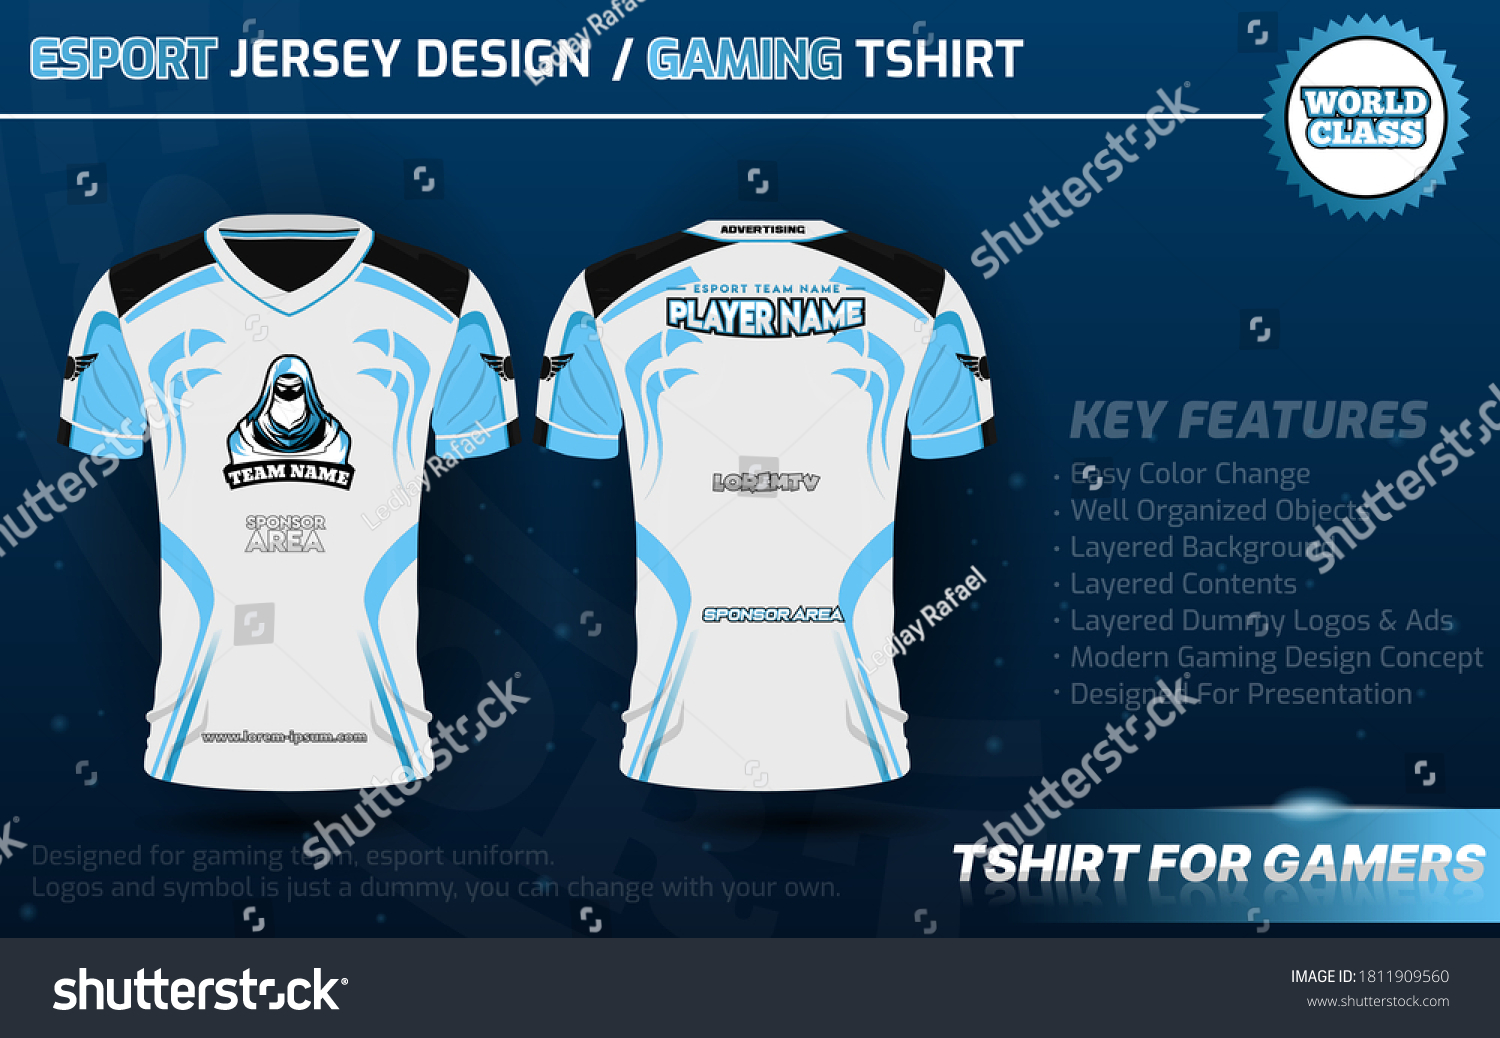 Download Tshirt Esport Design Template Soccer Jersey Stock Vector Royalty Free 1811909560